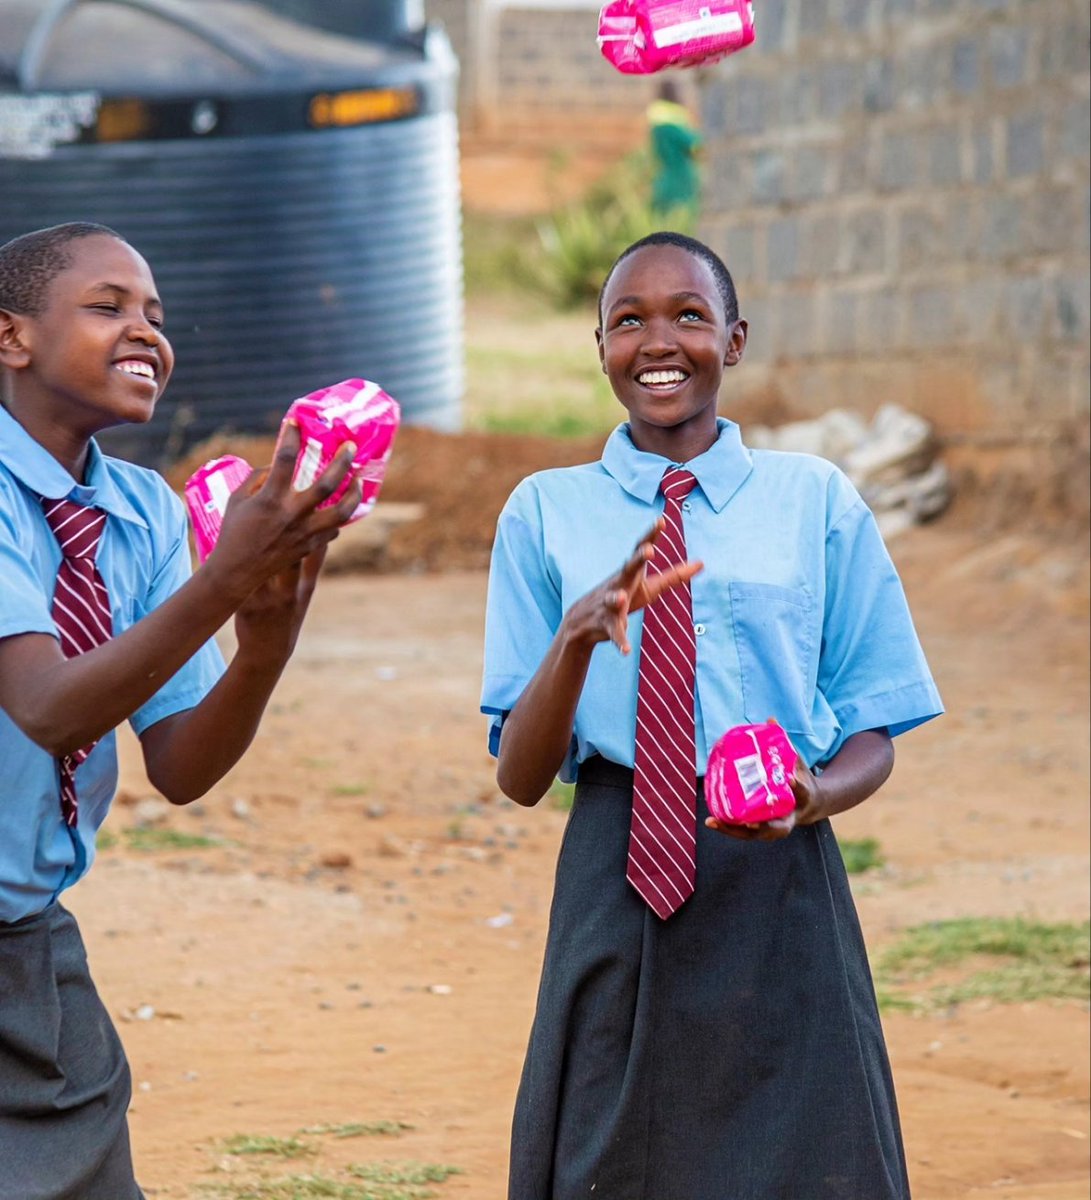 The soaring of period products prices in Kenya is a barrier for many girls & women to manage their menses with confidence, comfort and dignity! Would you know of underserved schools in need of #periodproducts #menstrualhealth #reproductivehealth ED in #Laikipia county?